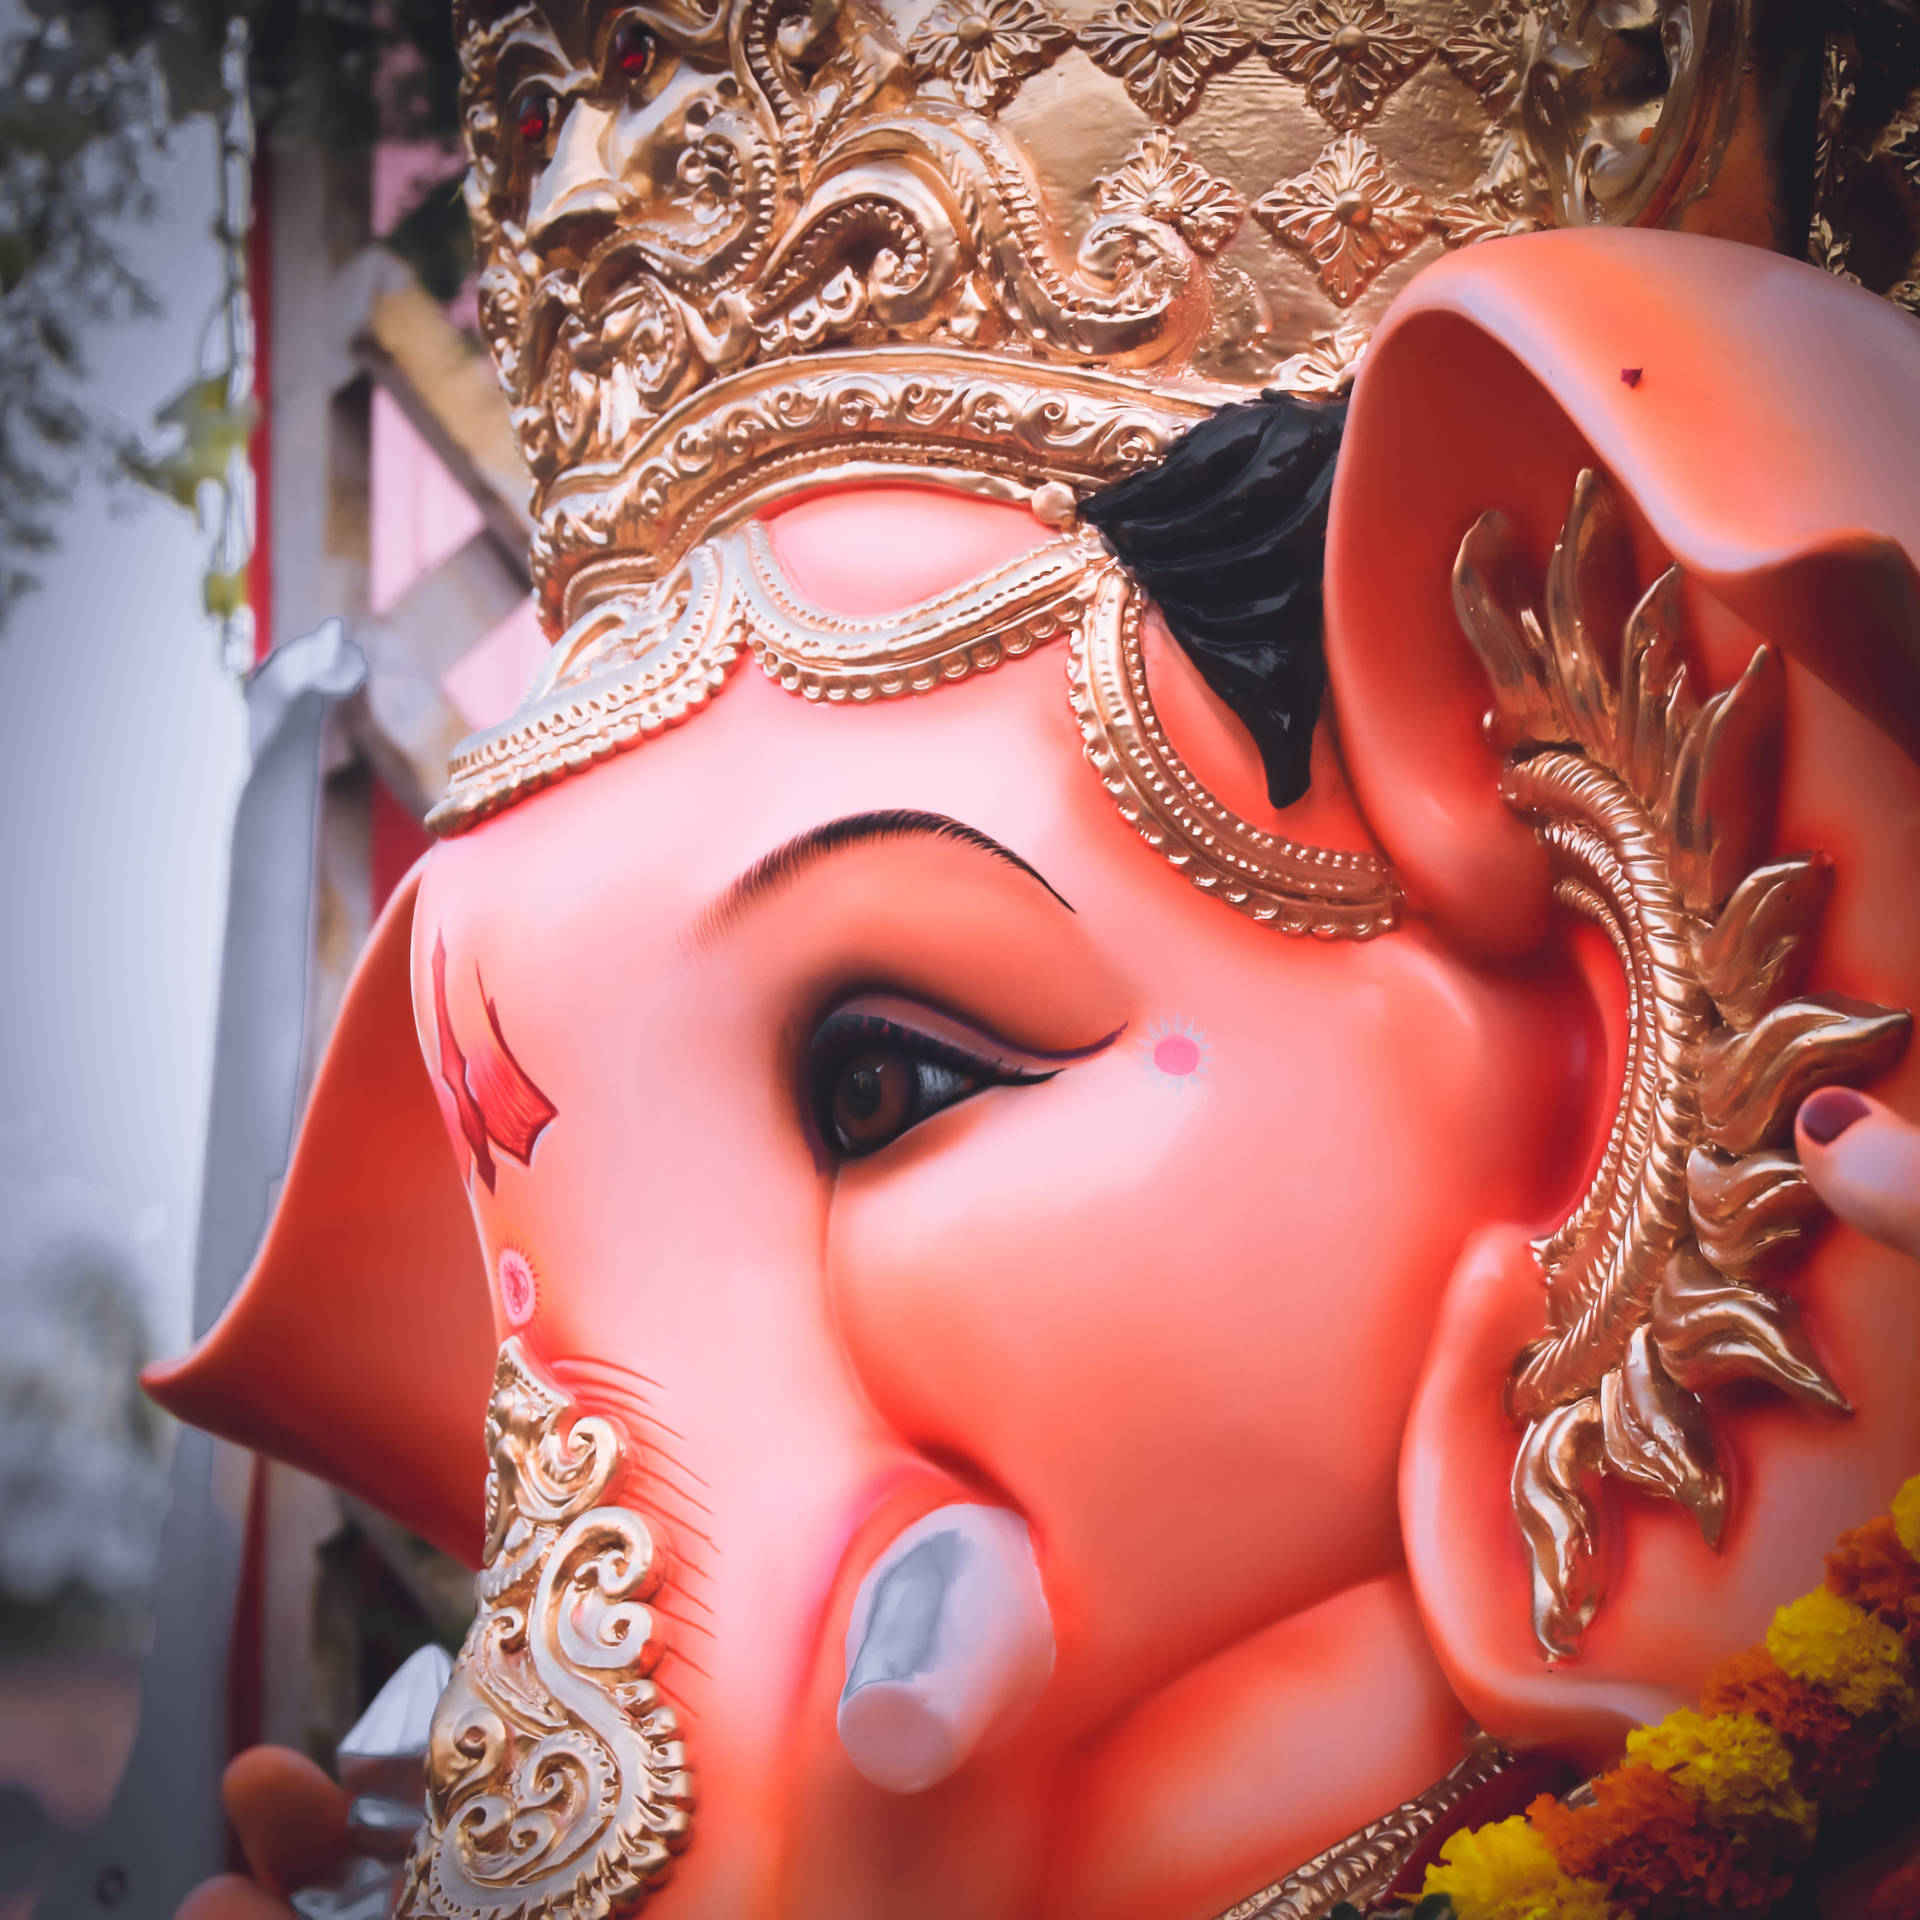 Majestic view of Red-faced Lalbaugcha Raja Wallpaper